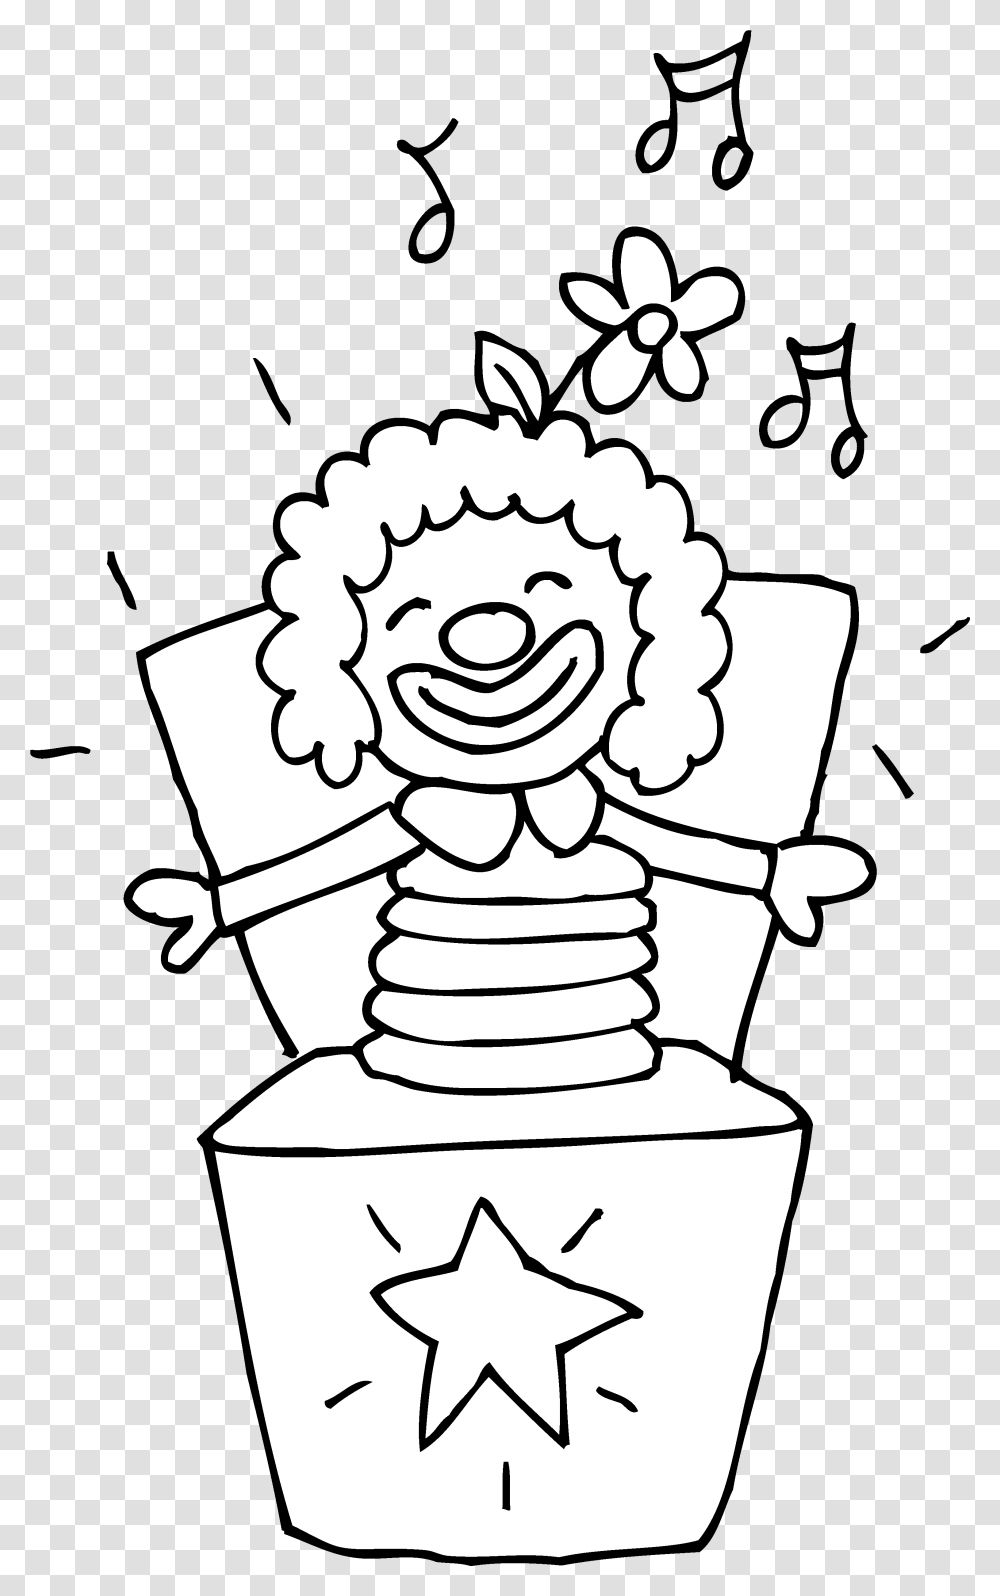 Colorable Jack In The Box Toy Jack In The Box Clipart Black And White, Food, Wedding Cake, Dessert, Rattle Transparent Png